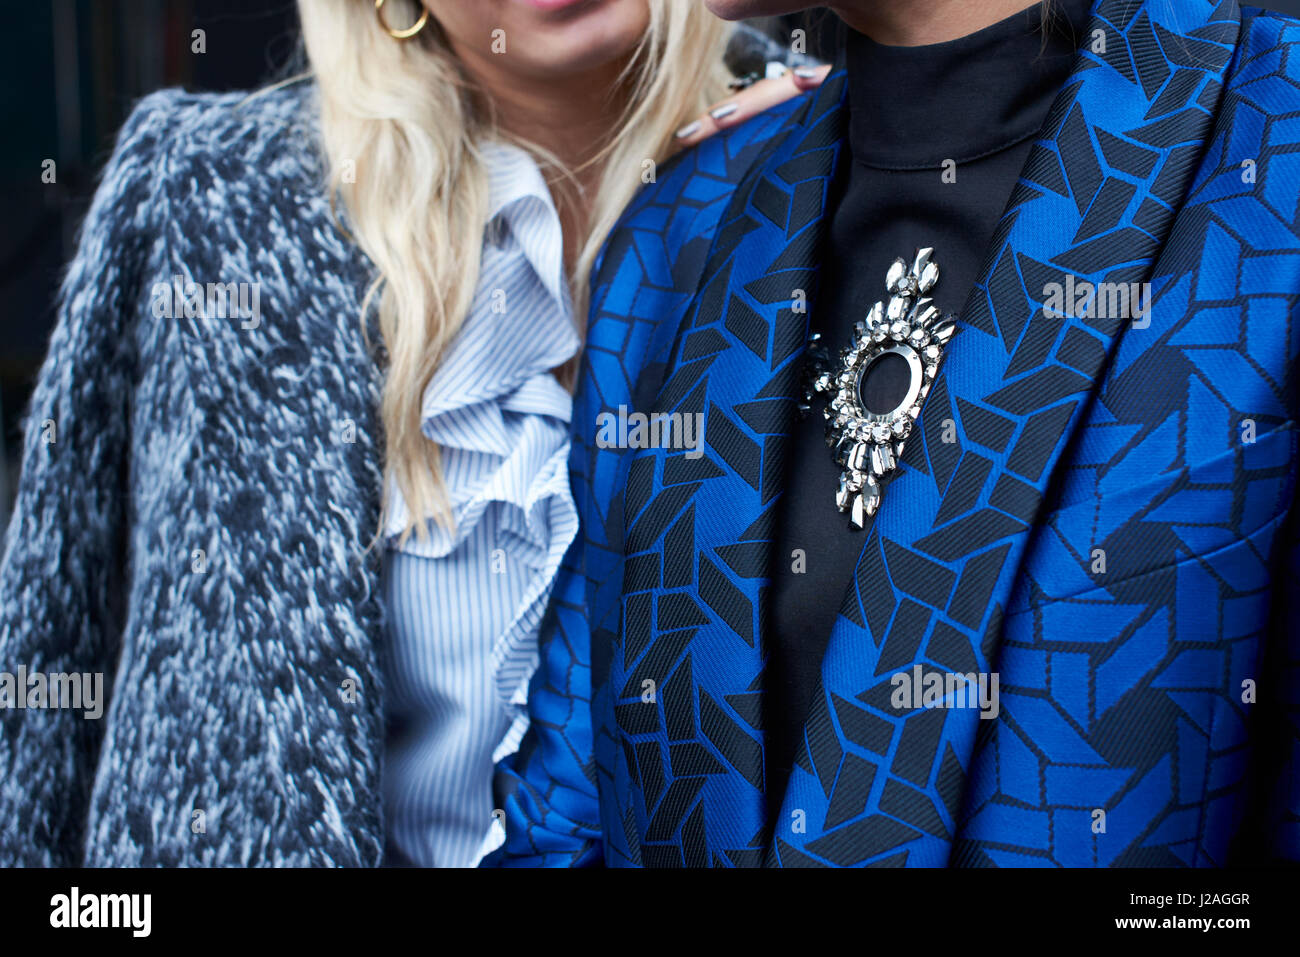 LONDON - FEBRUARY, 2017: Mid section close up of two fashionable women, one wearing a wool jacket and the other a patterned silk jacket, London Fashion Week, horizontal, back view Stock Photo